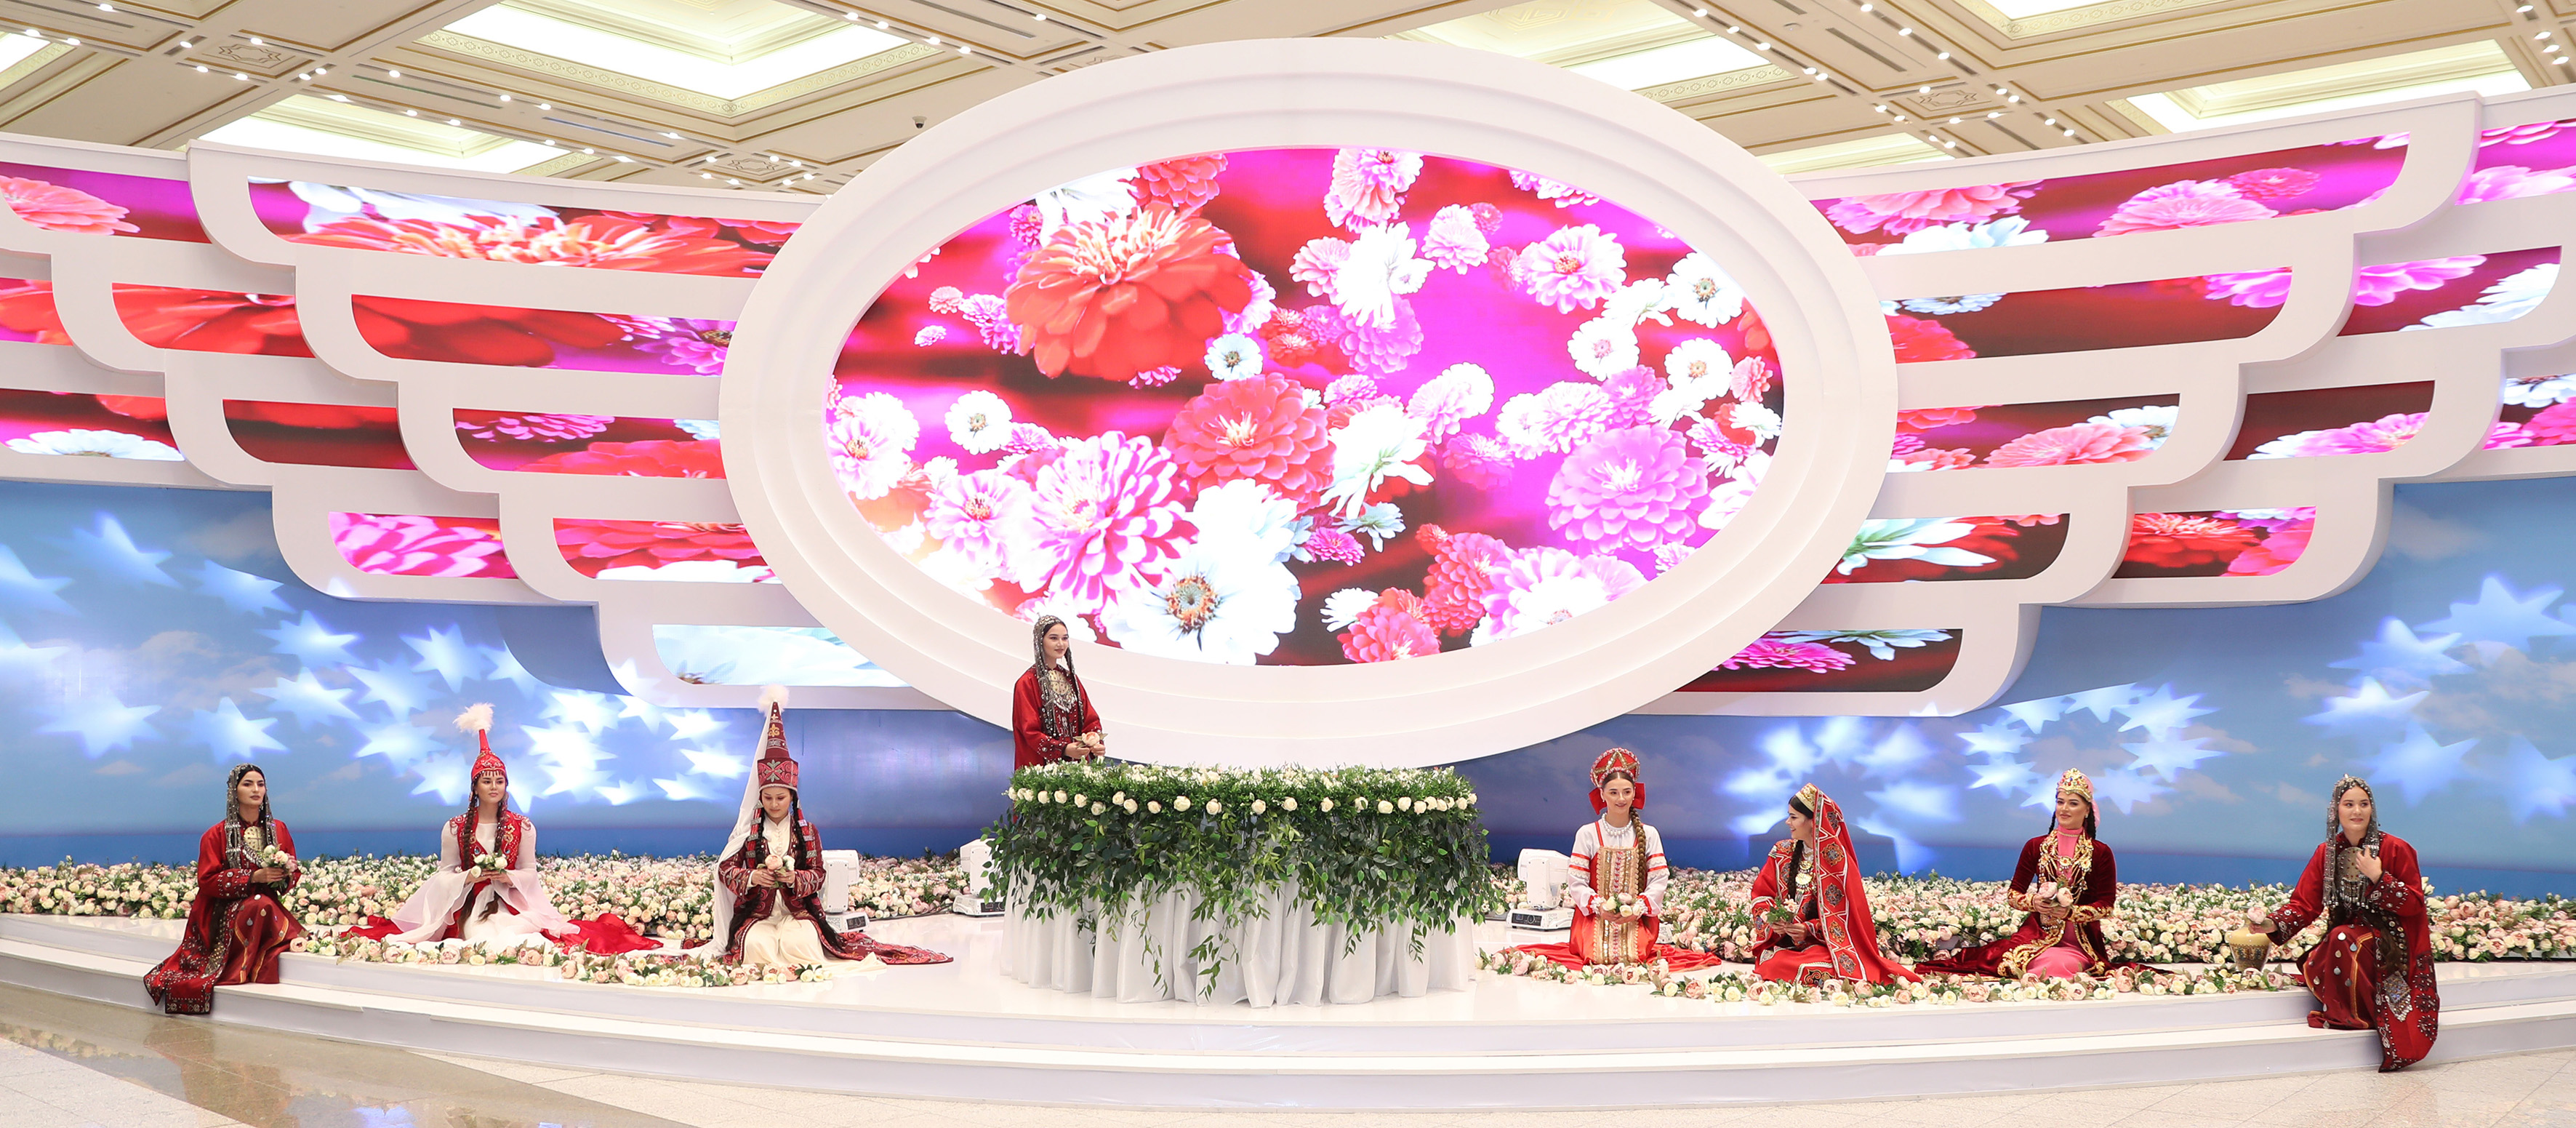 A meeting of the Dialogue of Women of Central Asian States and Russia was held in Ashgabat